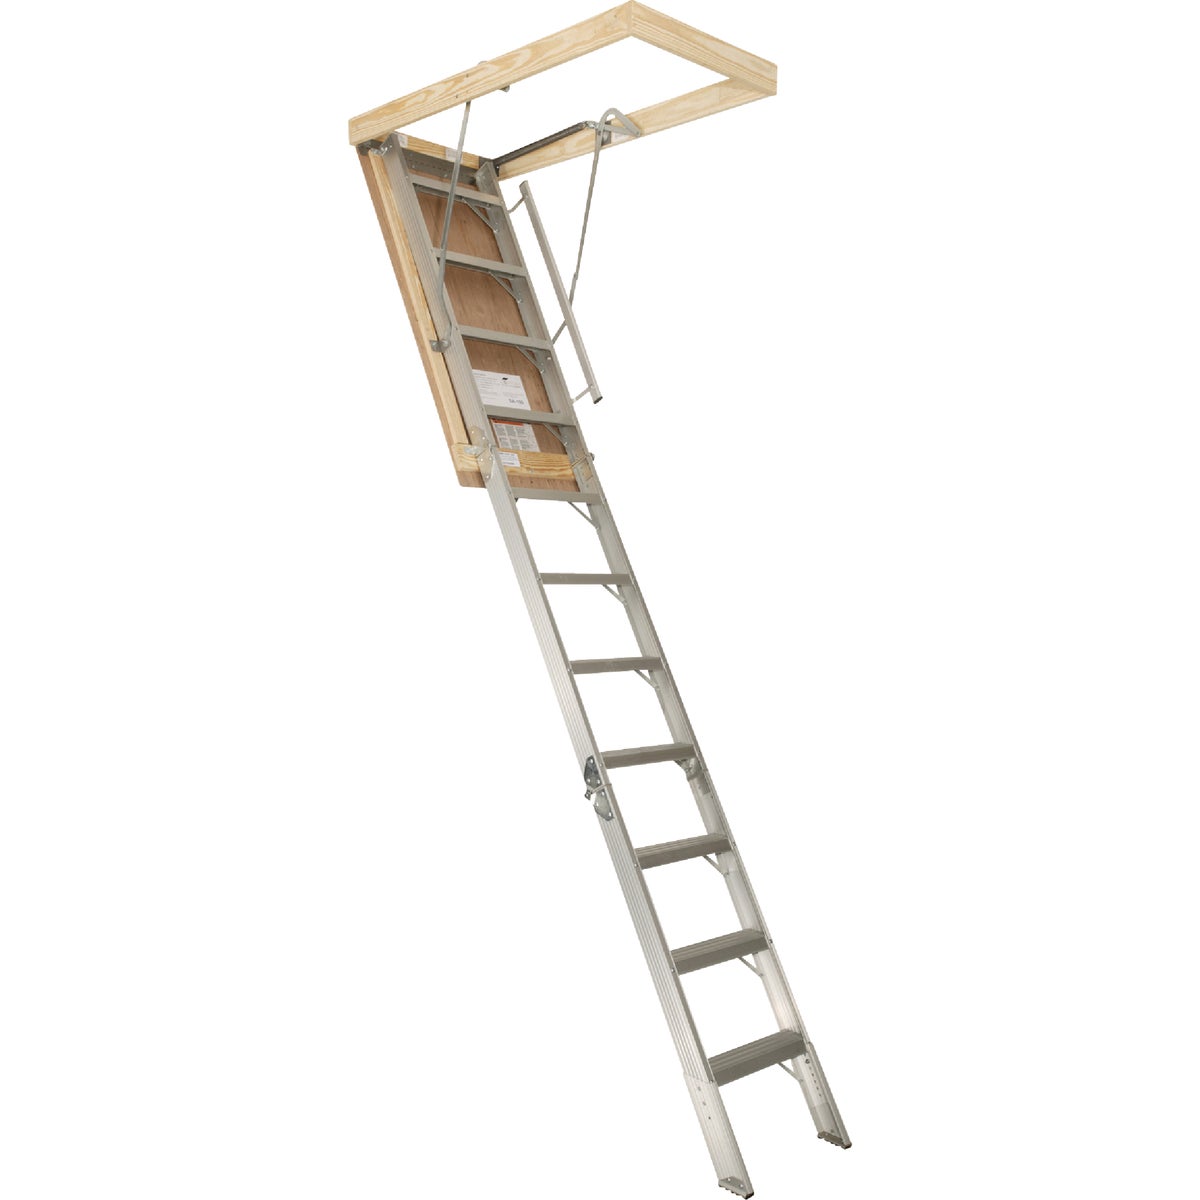 Louisville Elite 7 Ft. 8 In. to 10 Ft. 3 In. 25-1/2 In. x 54 In. Aluminum Attic Stairs, 375 Lb. Load